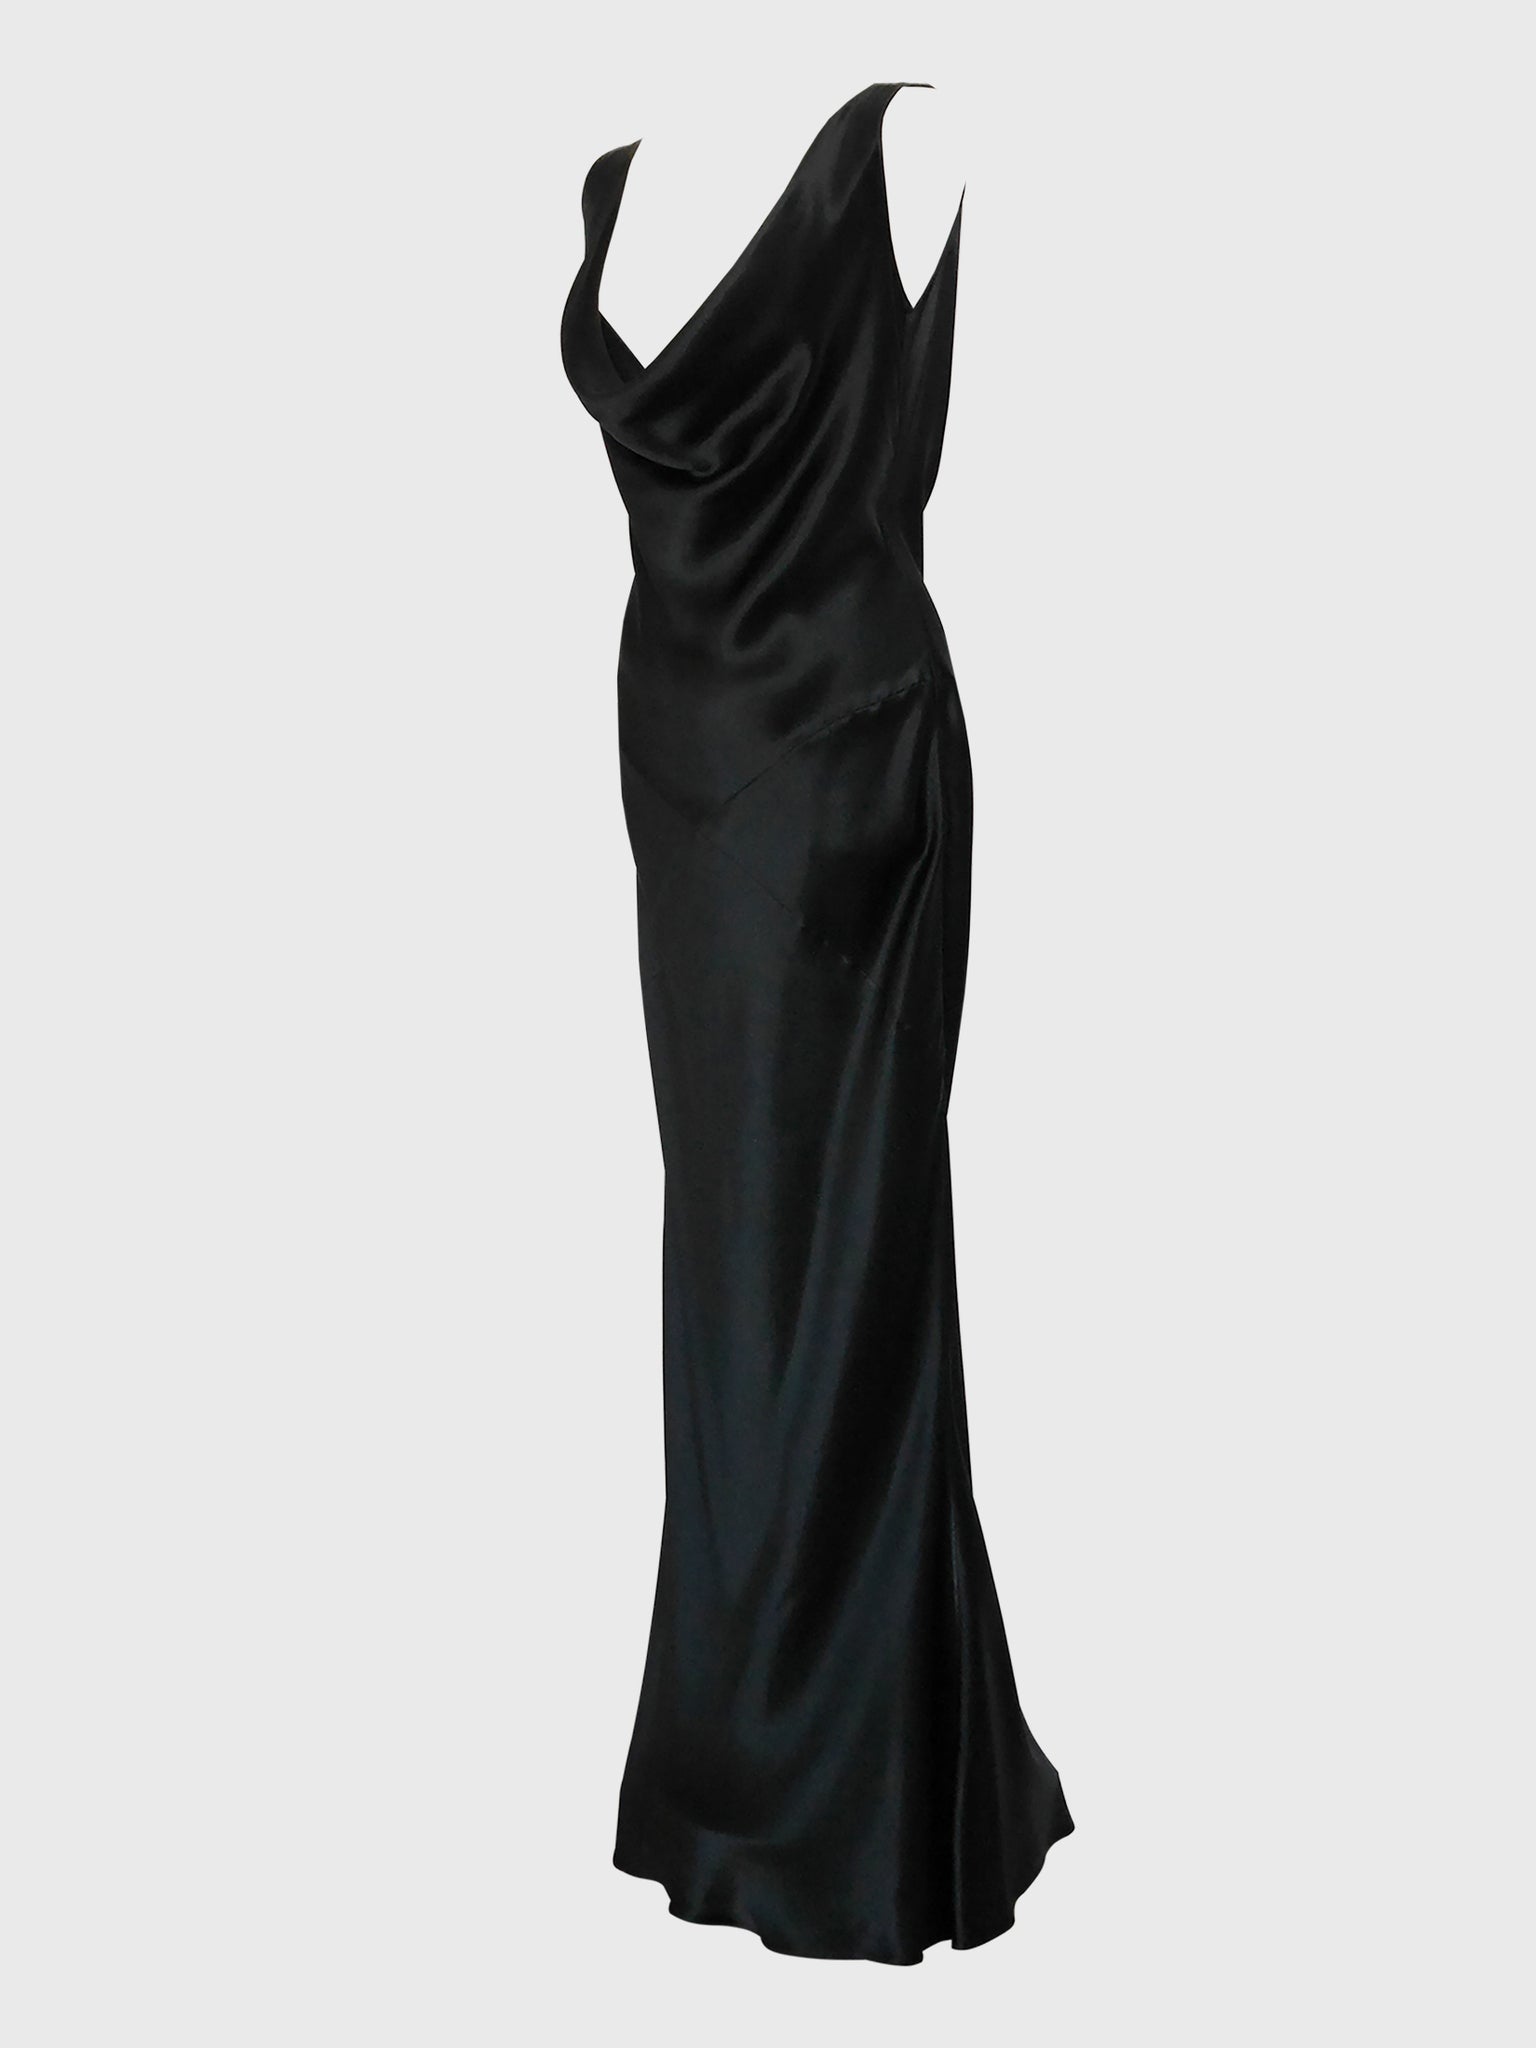 JOHN GALLIANO Spring 2003 Vintage Backless Cowl Neck Maxi Evening Gown